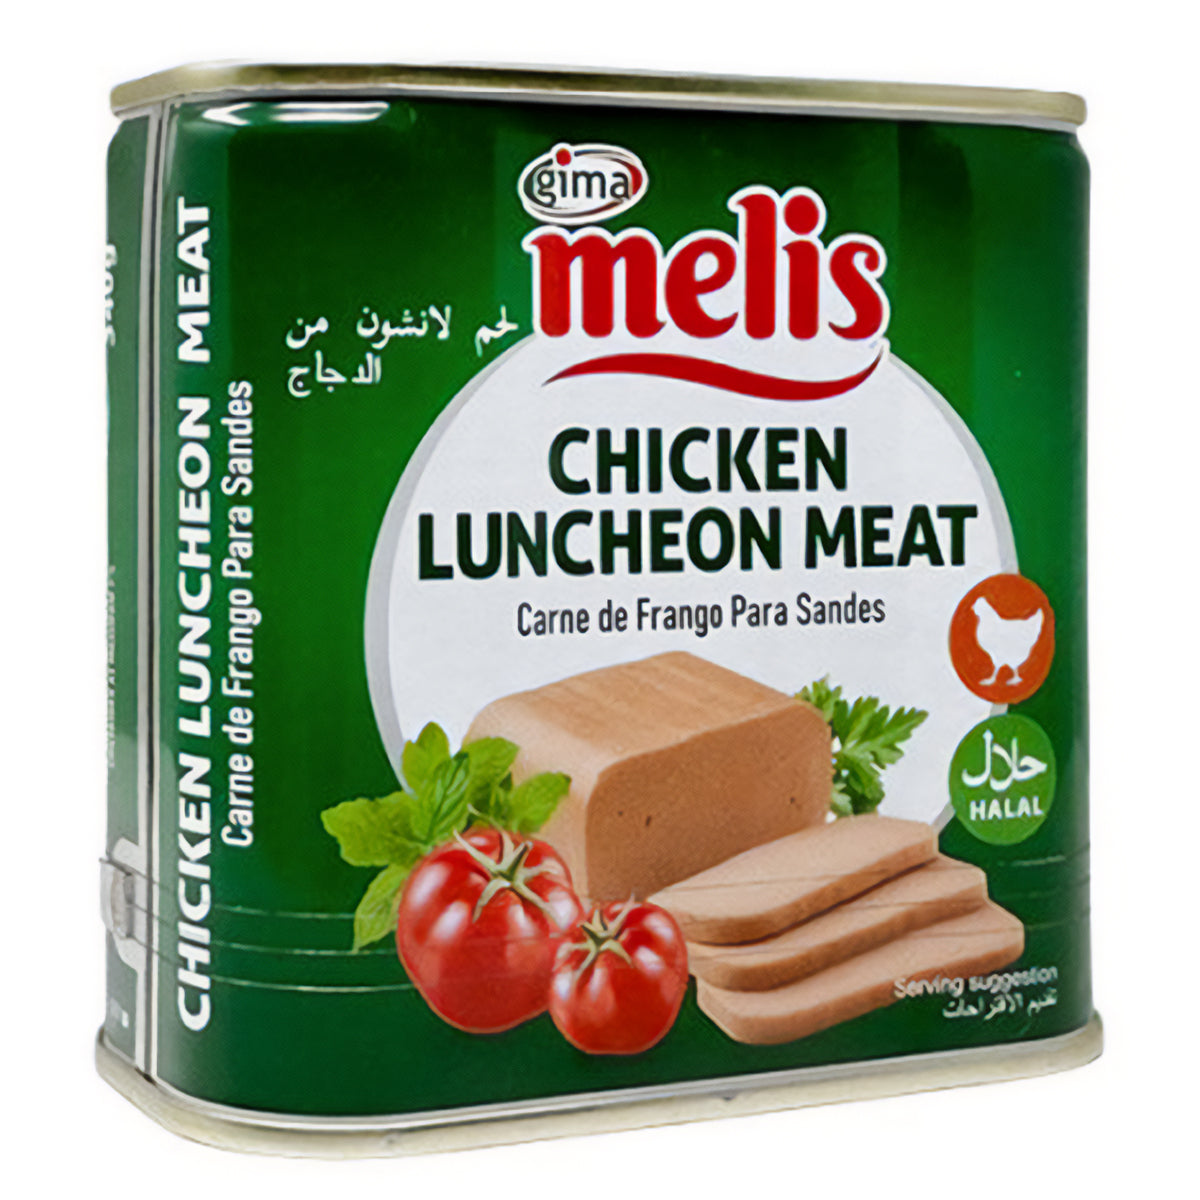 Gima - Melis Chicken Luncheon Meat (Halal) - 340g in a can.